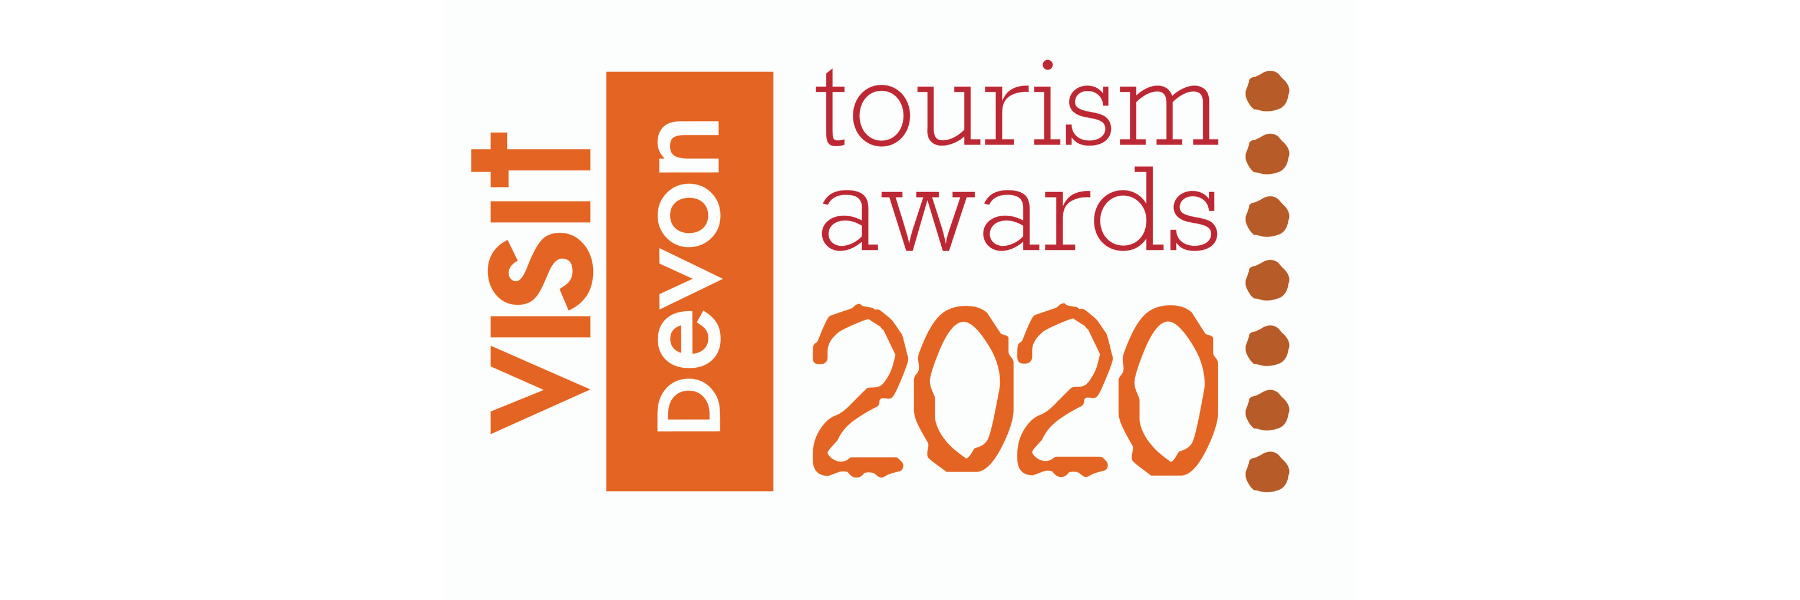 Review from the Devon Tourism Awards 2020